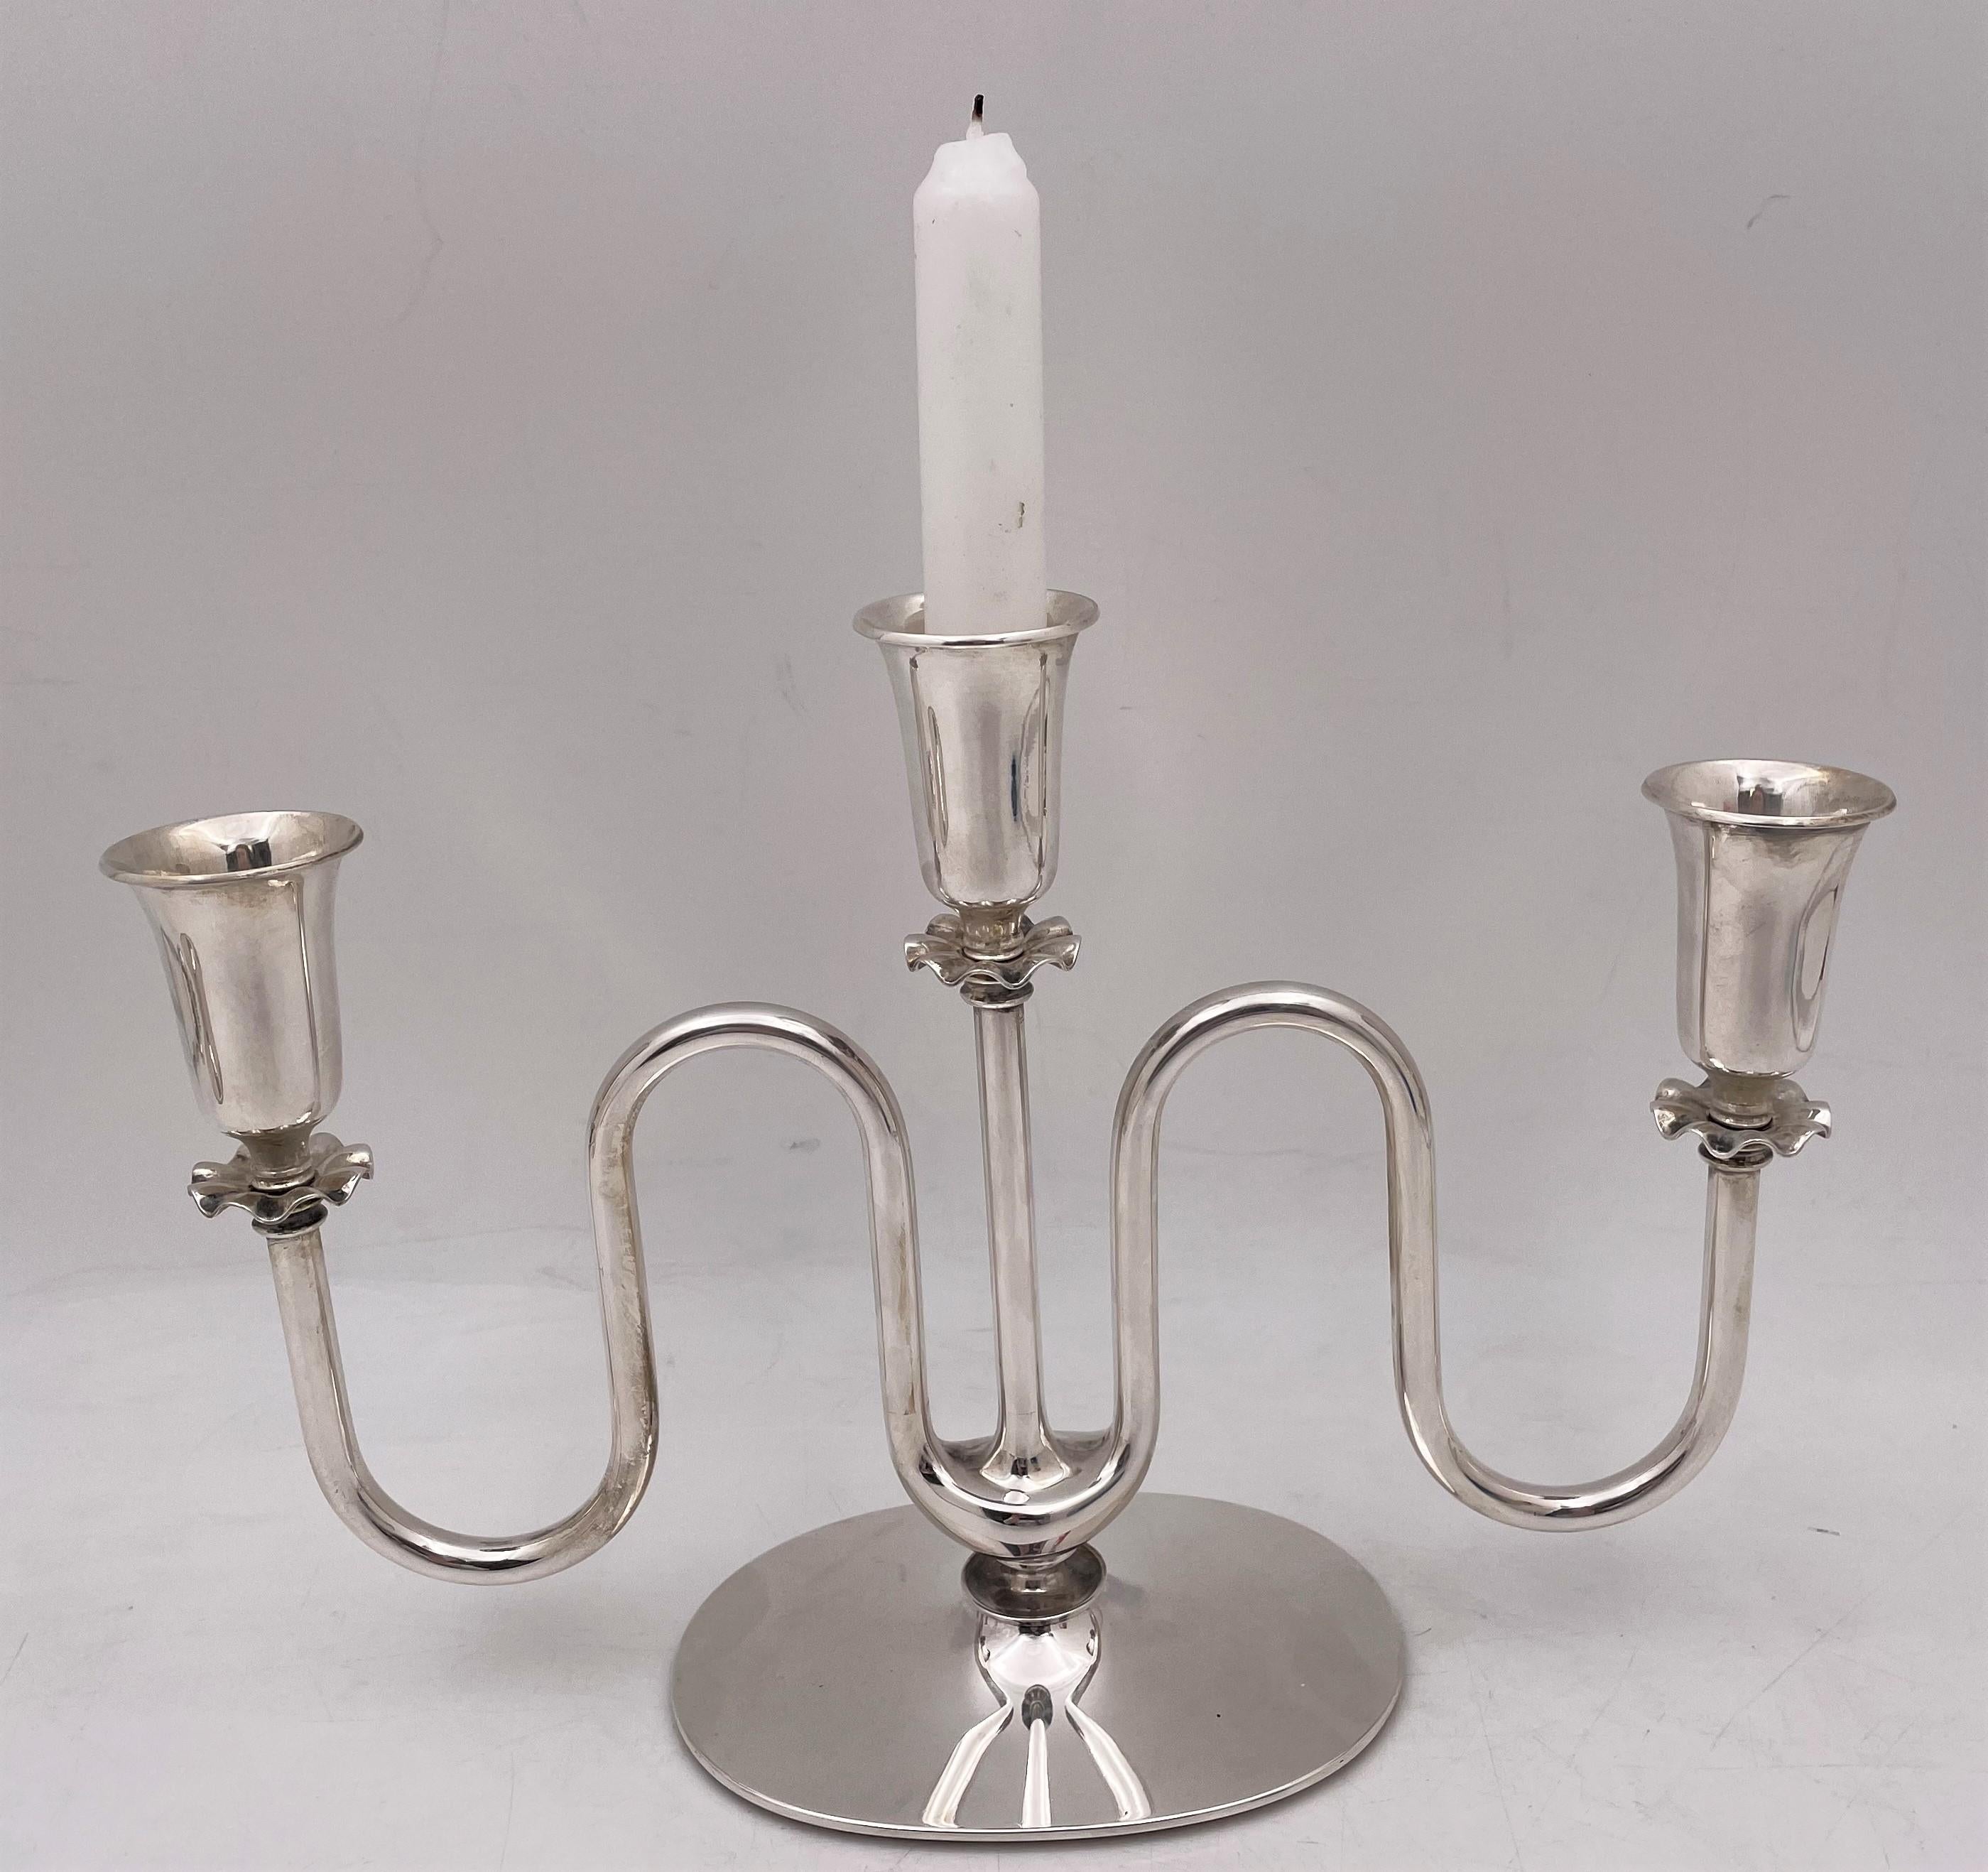 Cohr, Danish, sterling silver pair of 3-light (oil) candelabra in Mid-Century Modern style with an exquisite flowing design, measuring 11'' in length by 7 1/2'' in height by 3 1/2'' in depth, weighing 27.3 troy ounces, and bearing hallmarks as